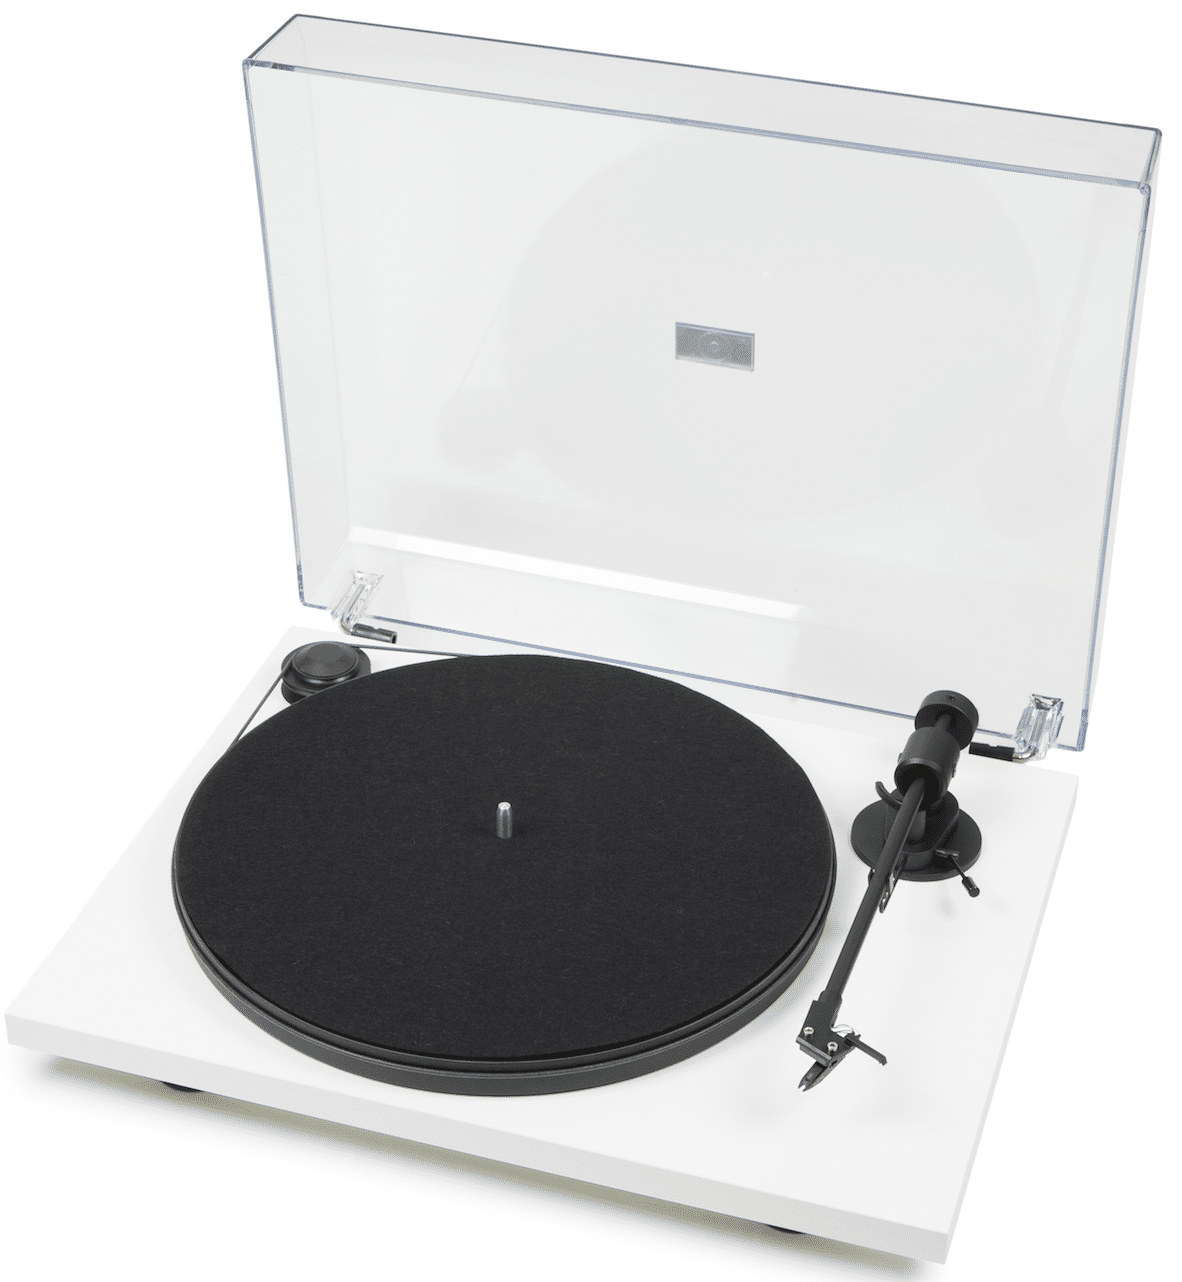 Primary from Pro-Ject